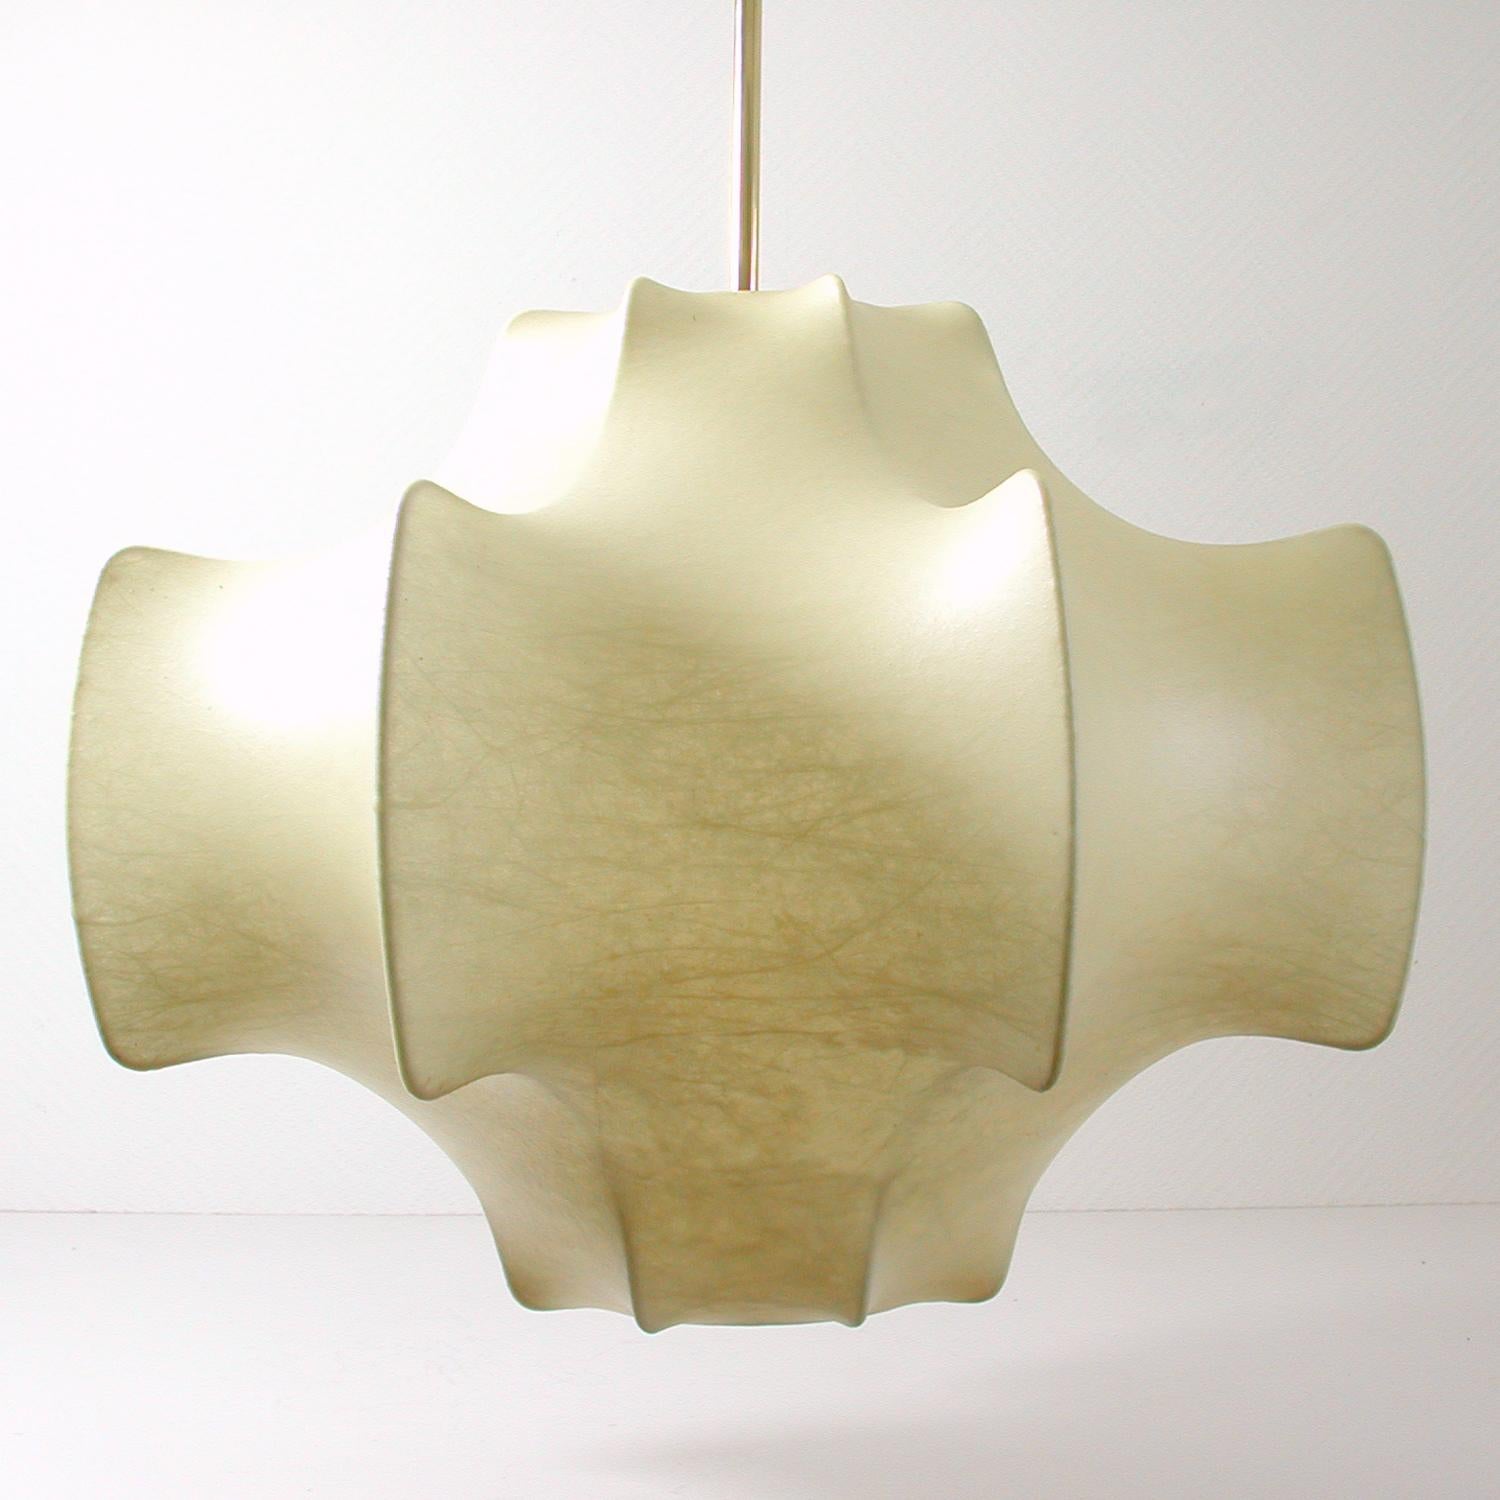 This medium size Viscontea pendant light was designed by Achille & Pier Giacomo Castiglioni for Flos in the 1960s and manufactured in Italy. 

The lamp shade is made of plastic polymer resin applied with spraying technique on to an enameled white